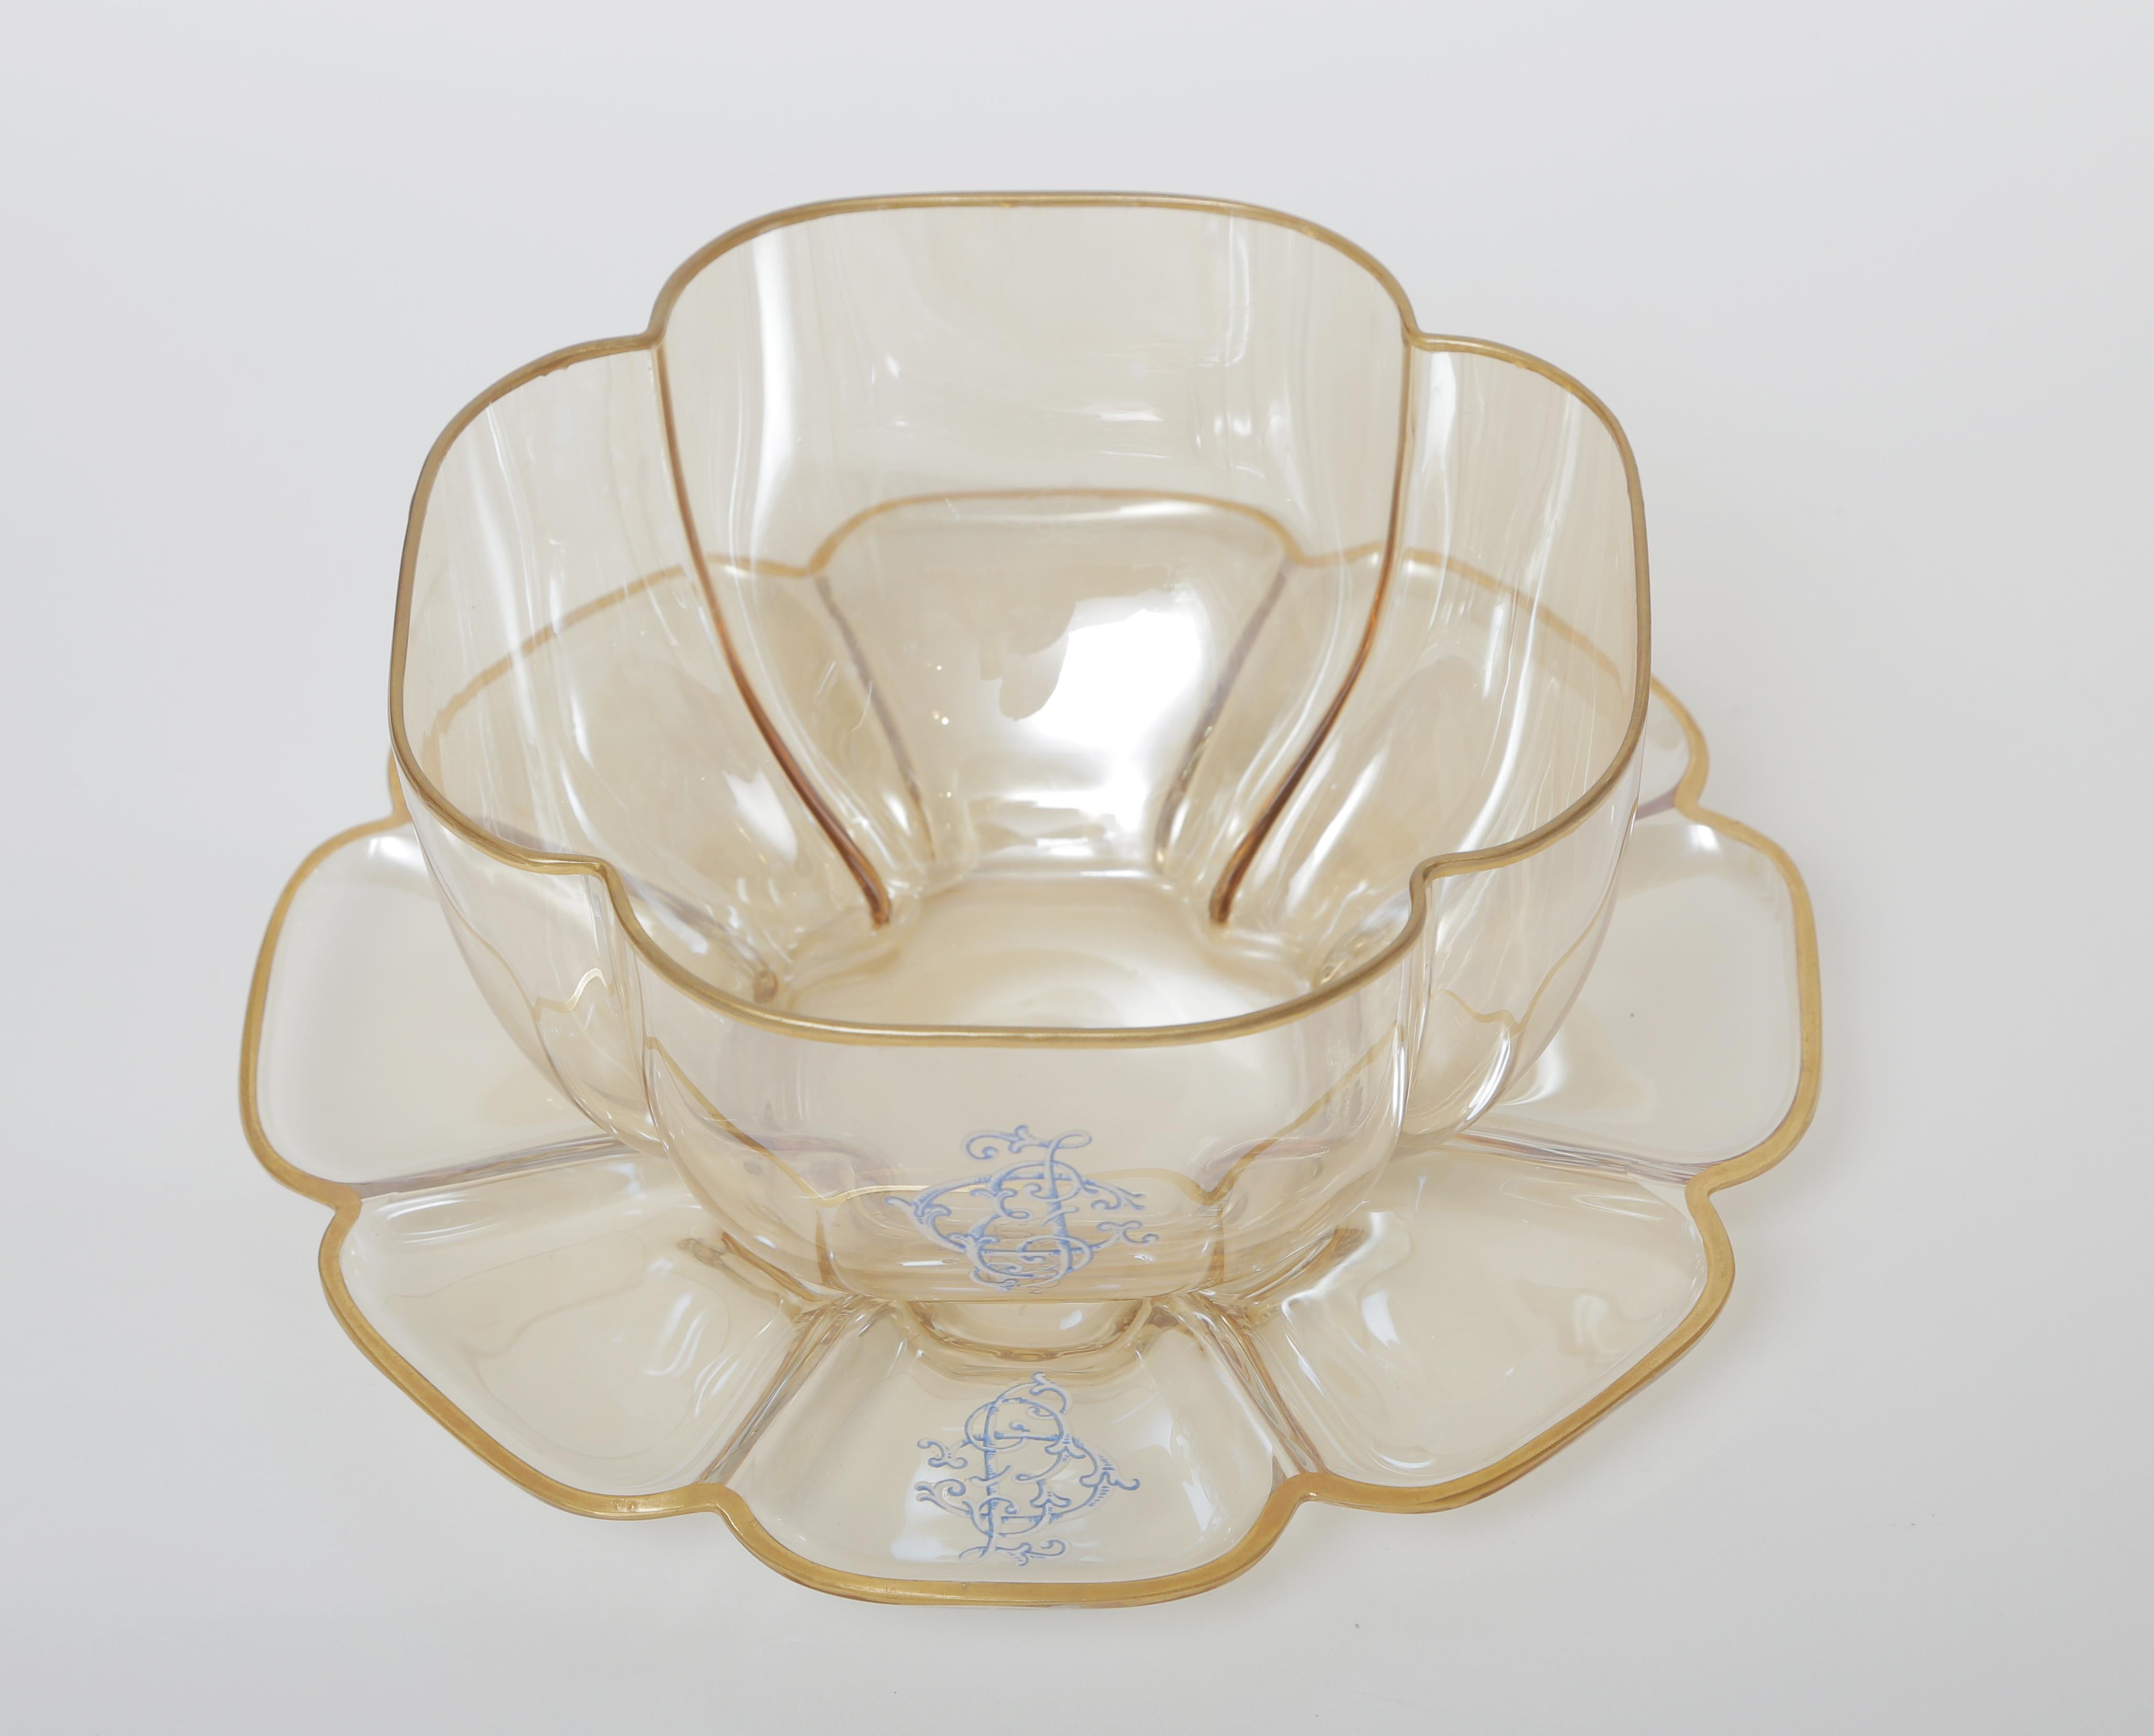 A wonderful and hard to find set of 12 dessert bowls and their matching underplates by the storied firm of Moser. Dating to the last quarter of the 19th century and circa 1880, they feature Moser's signature shaped bowl with blown finished pontils